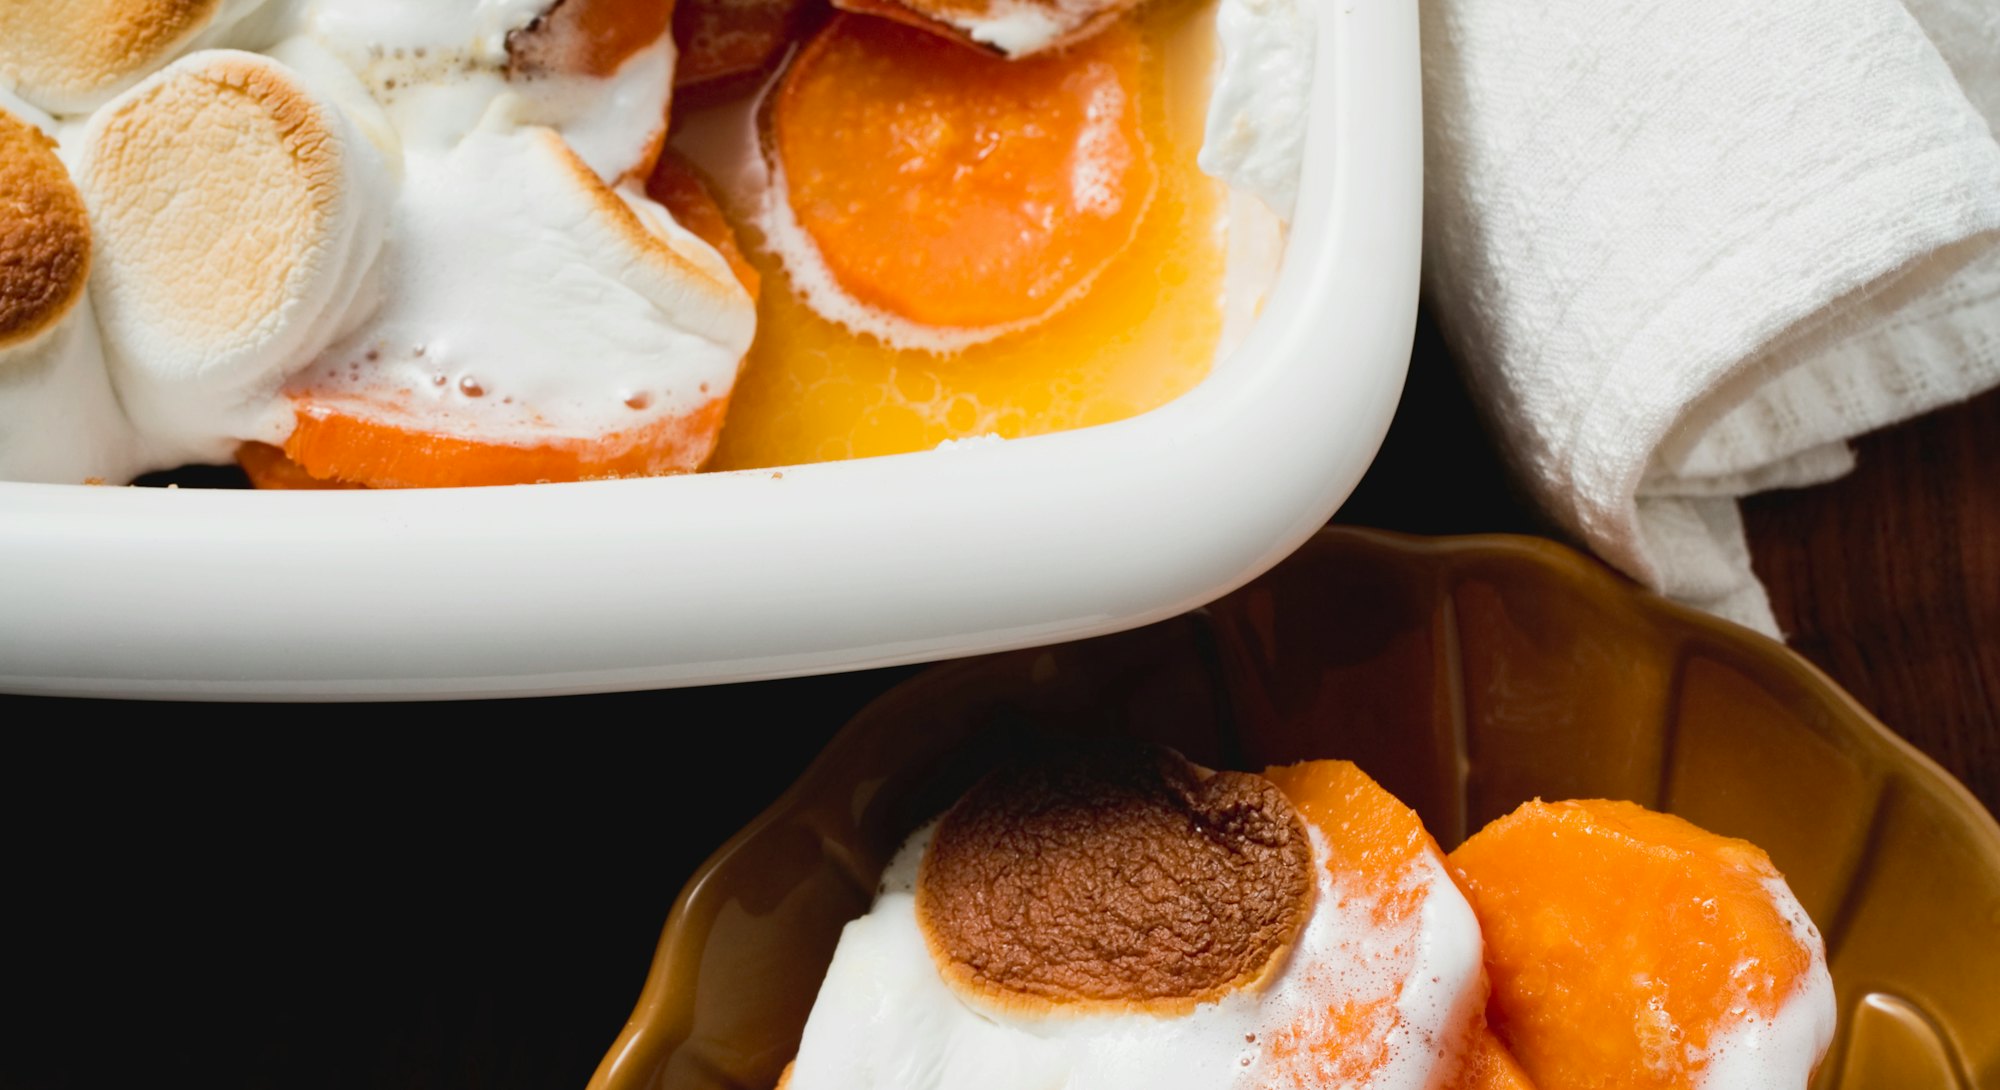 Sweet potato souffle with marshmallows is a great kid-friendly Thanksgiving side.